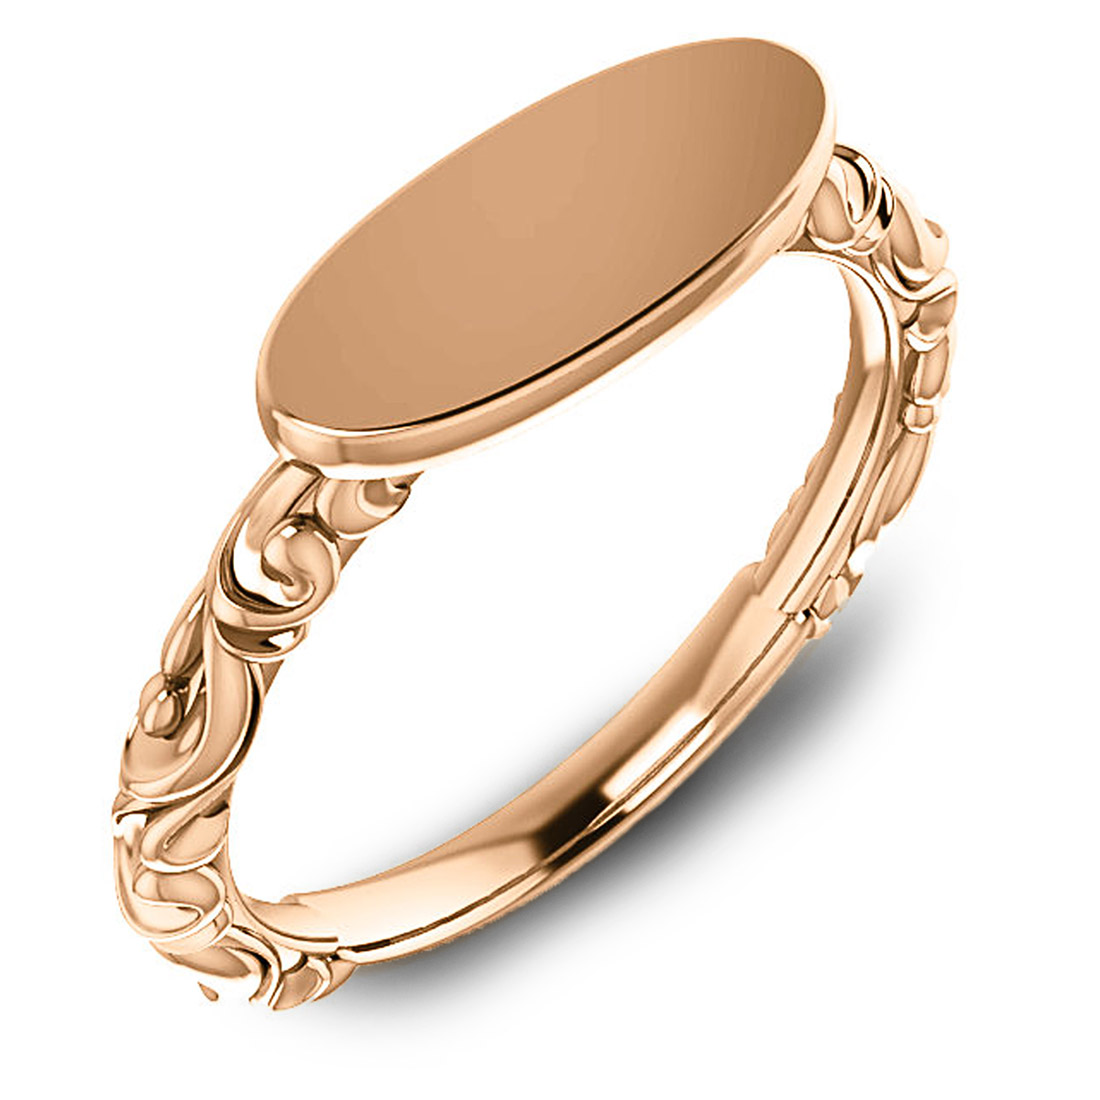 Rose gold personalizable engravable signet ring